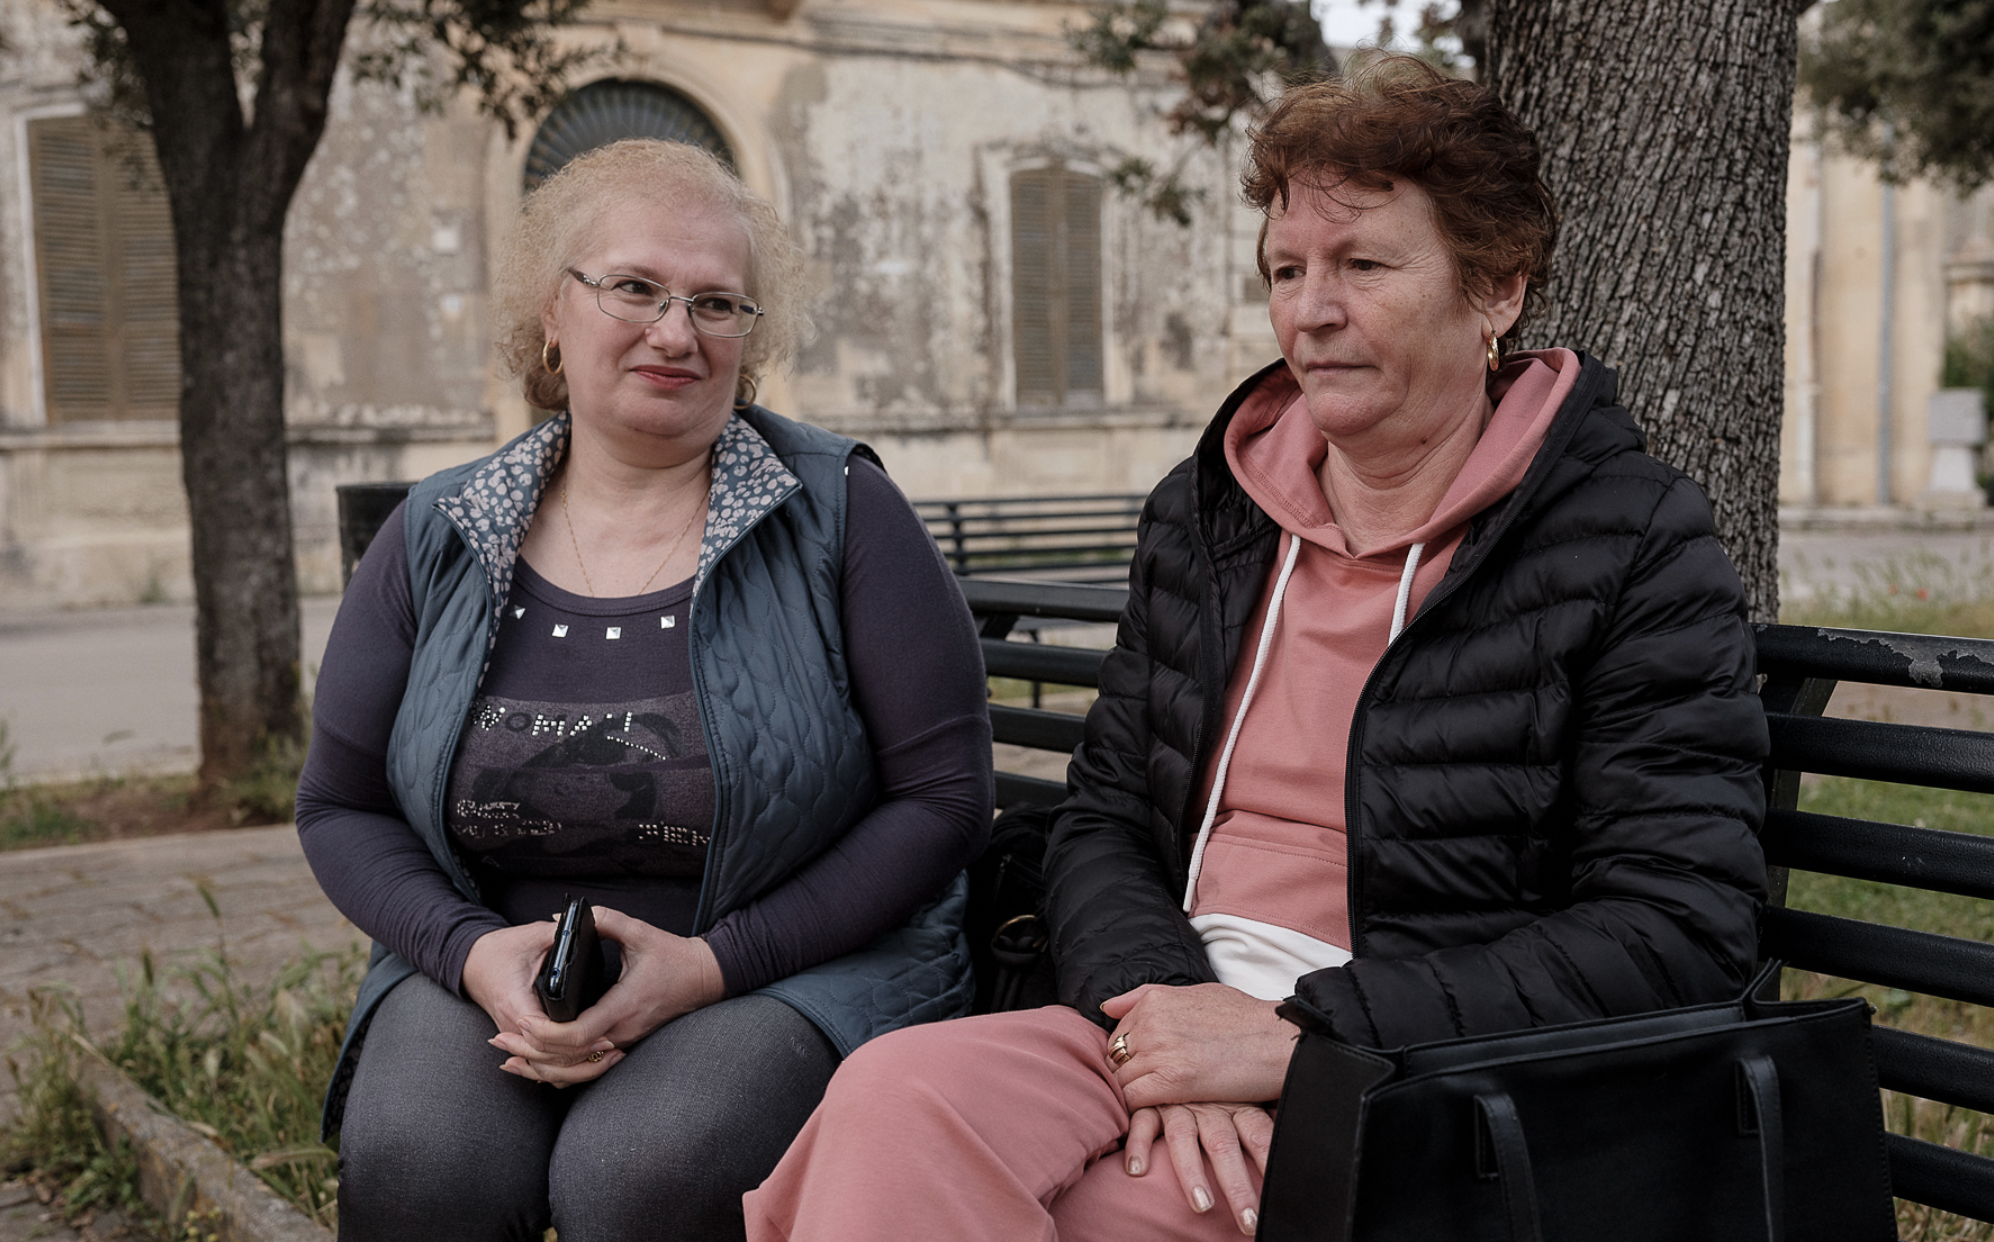 Mioara (left) and Neta (right), both from Craiova, work as maids in the town of Cursi, province of Lecce. Italy, May 2022. ©Cosmin Bumbuț